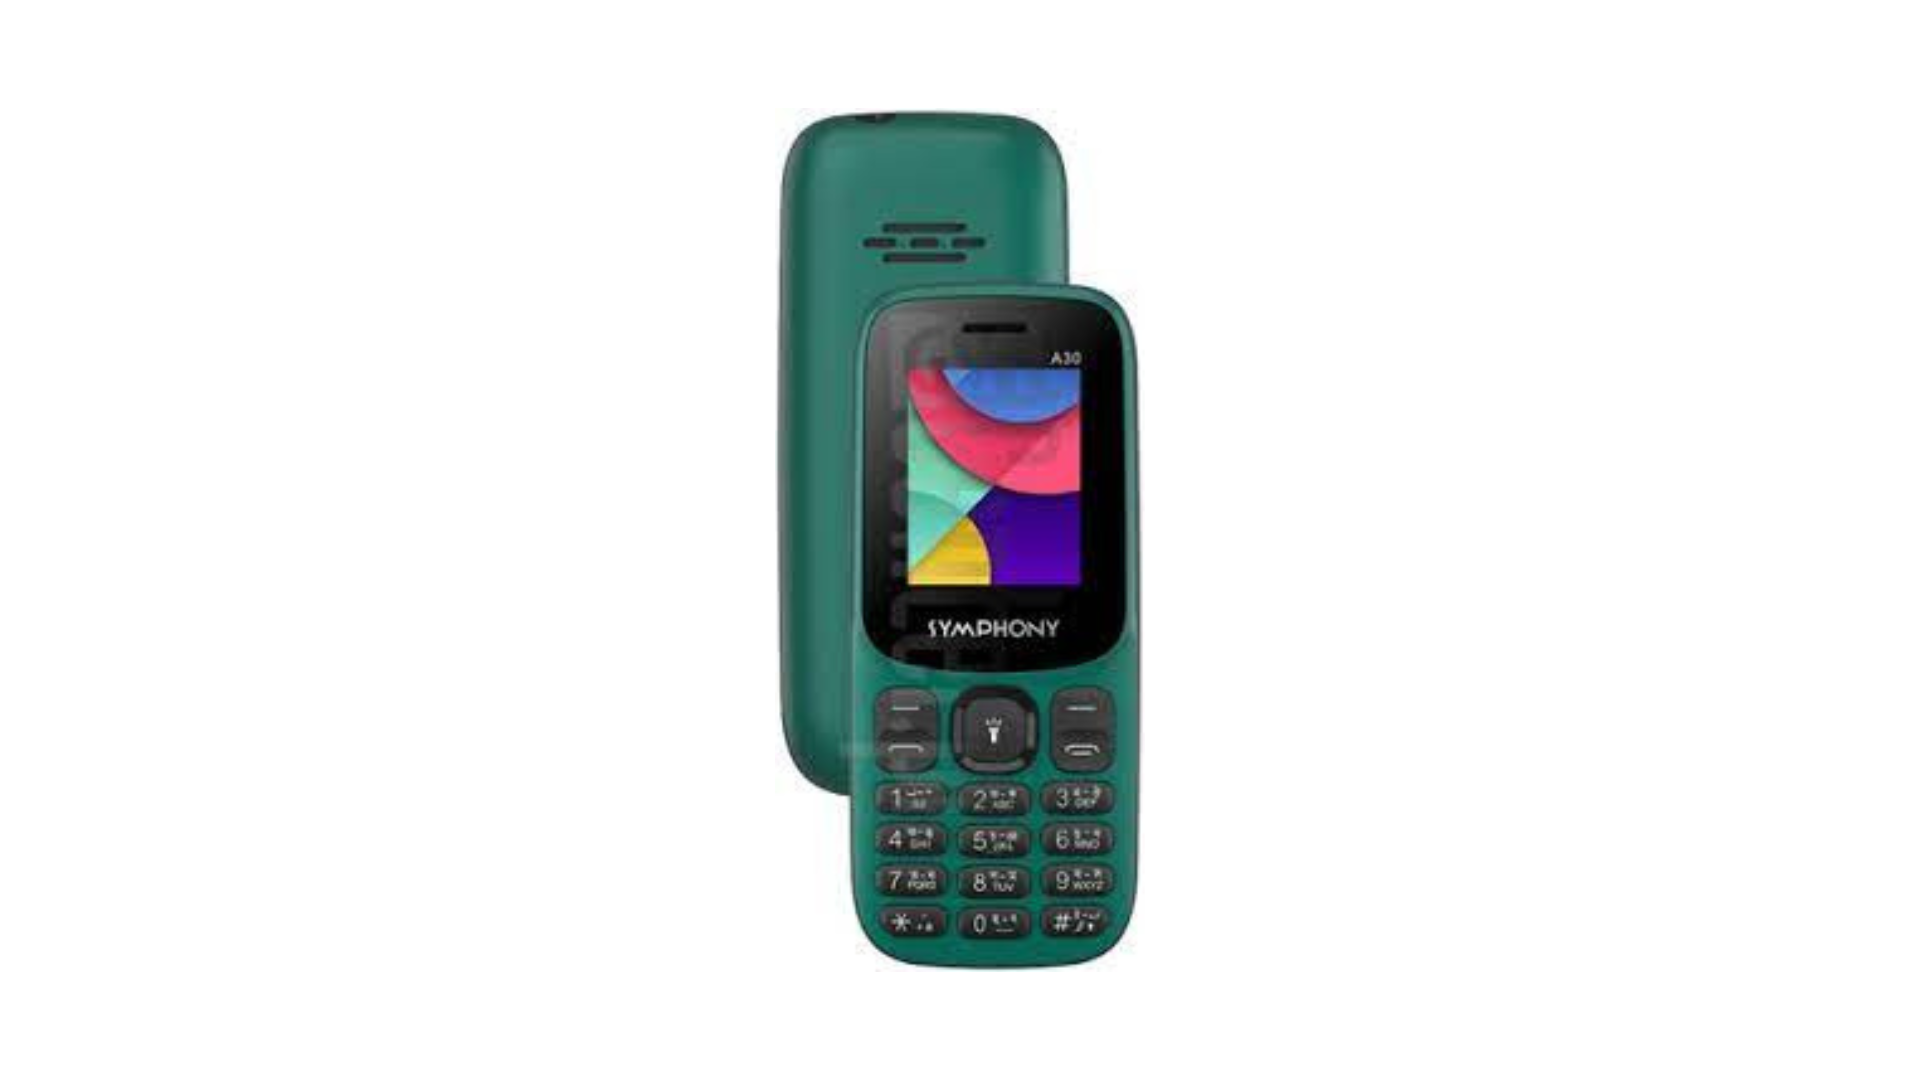 Symphony A30 Price In Bangladesh